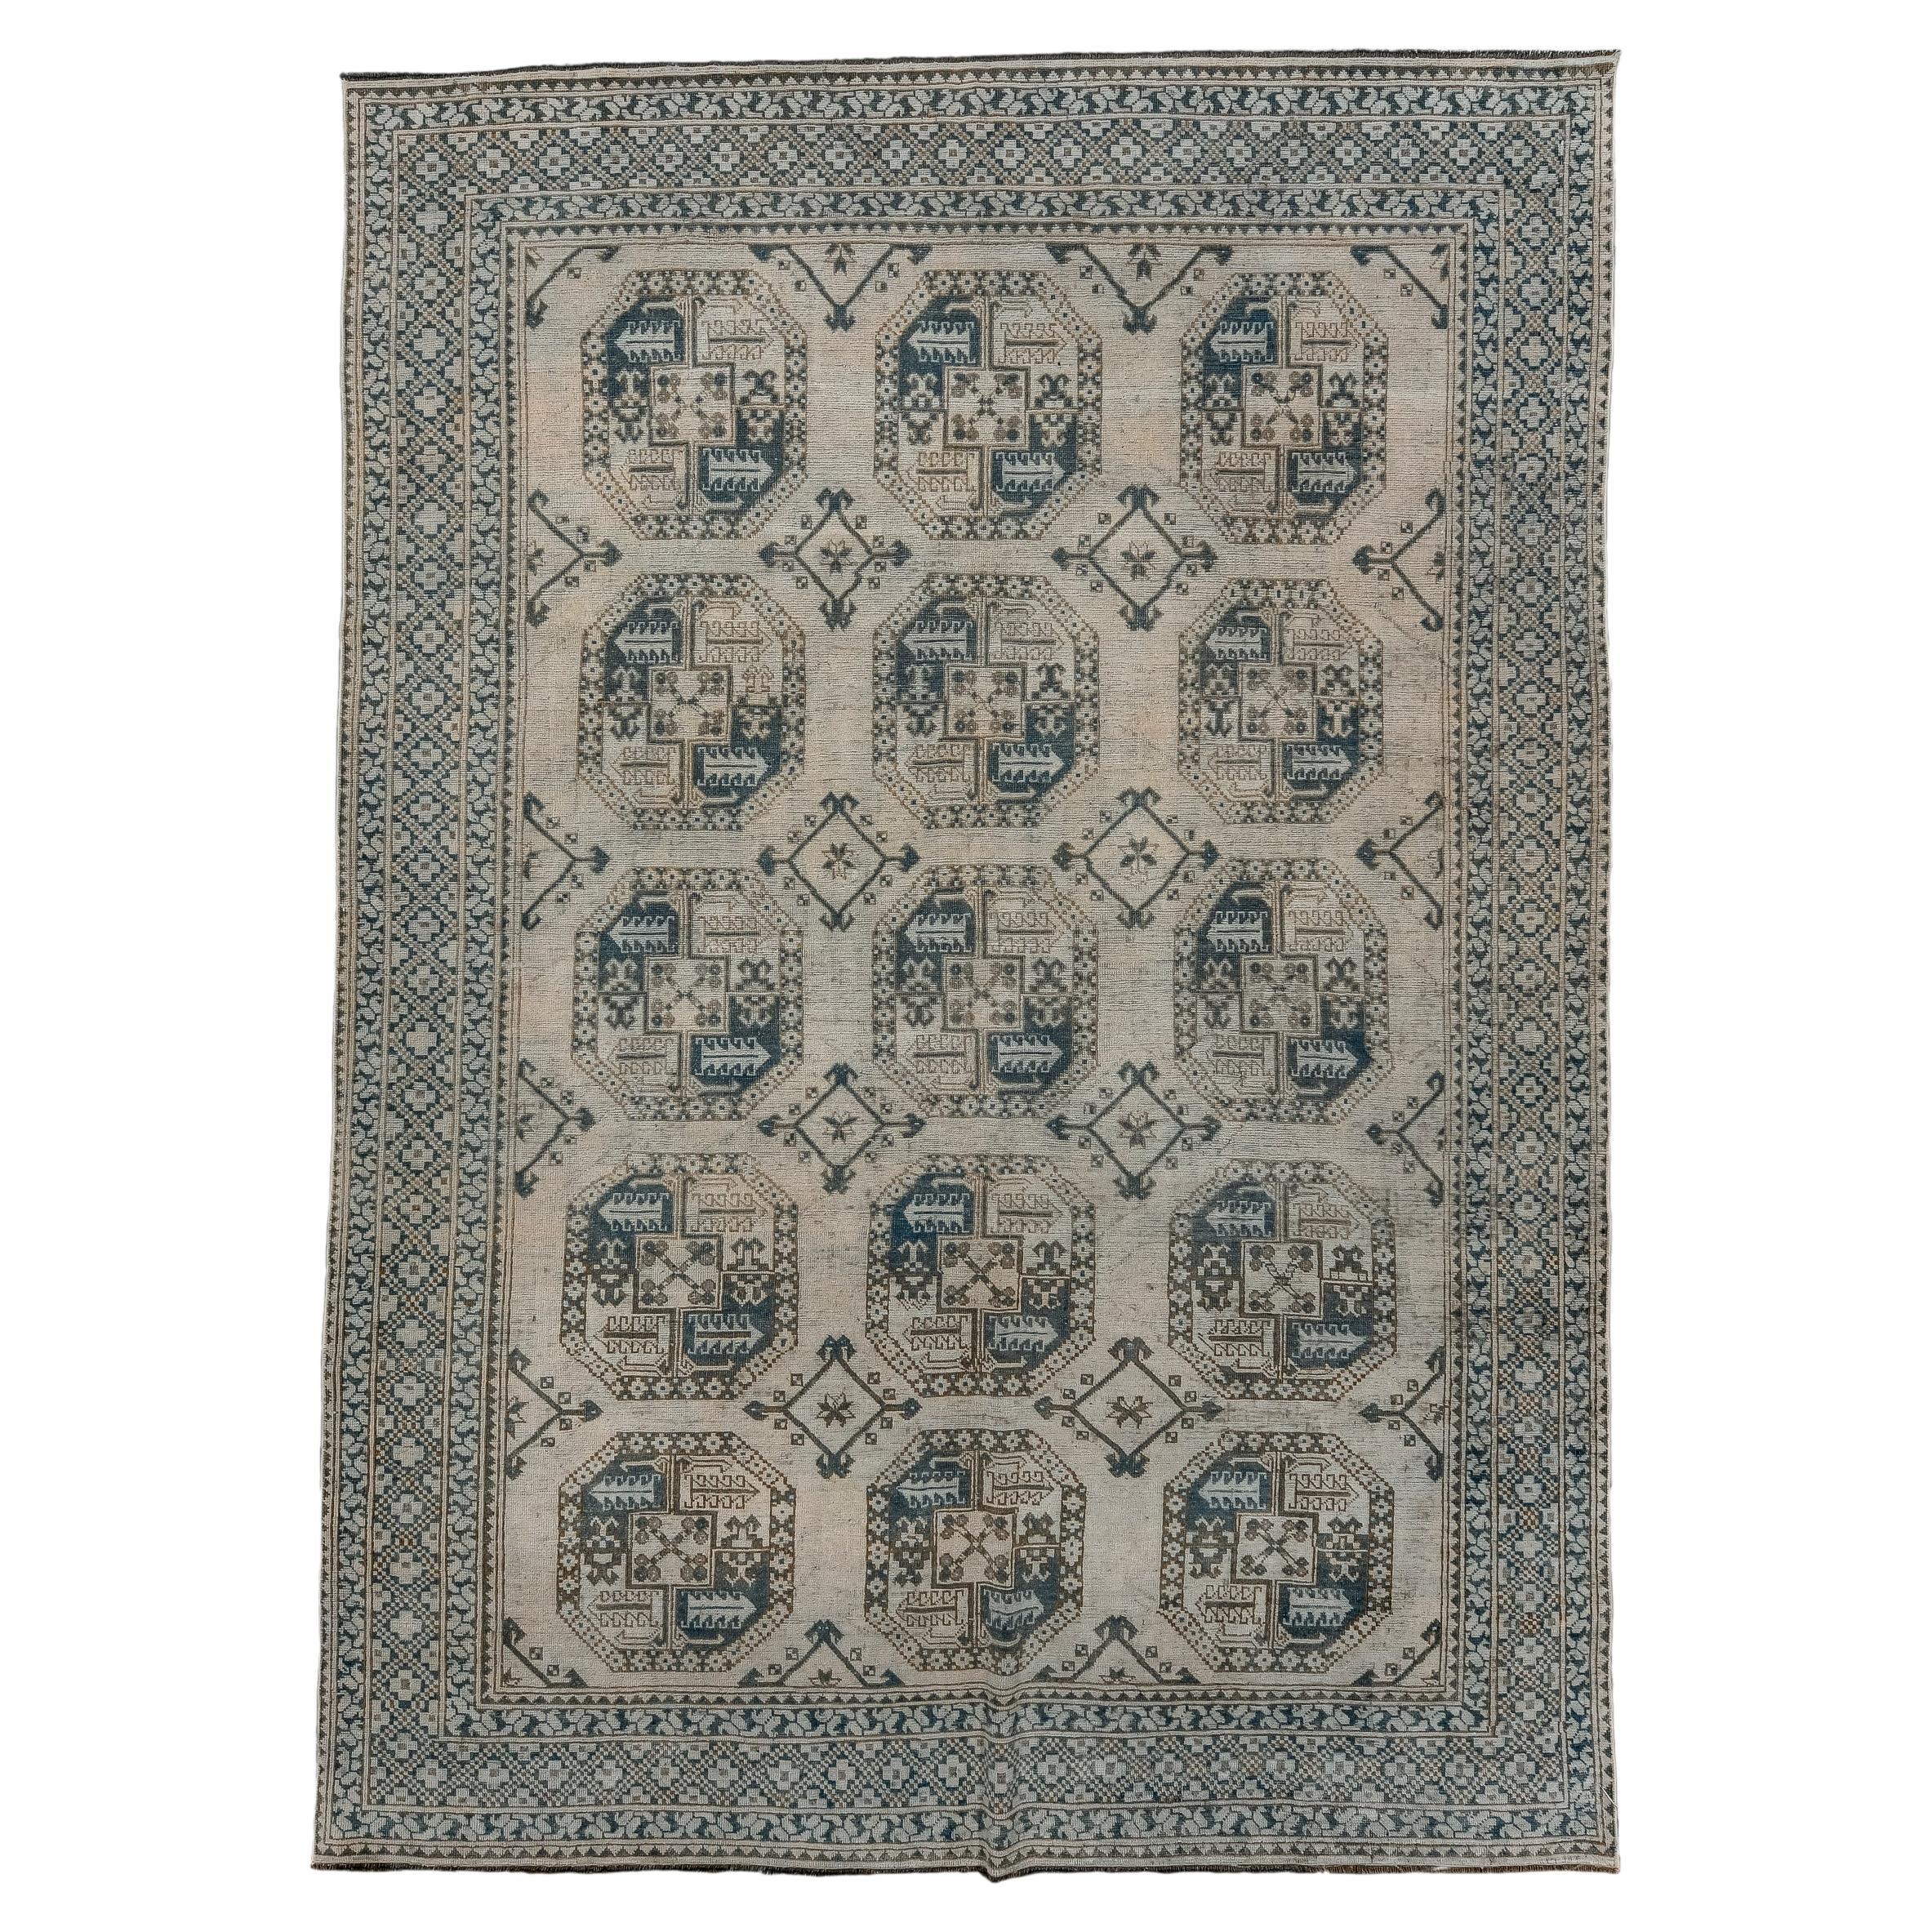 Antique Ersari Rug with Brown and Blue Details and Diamond Border For Sale